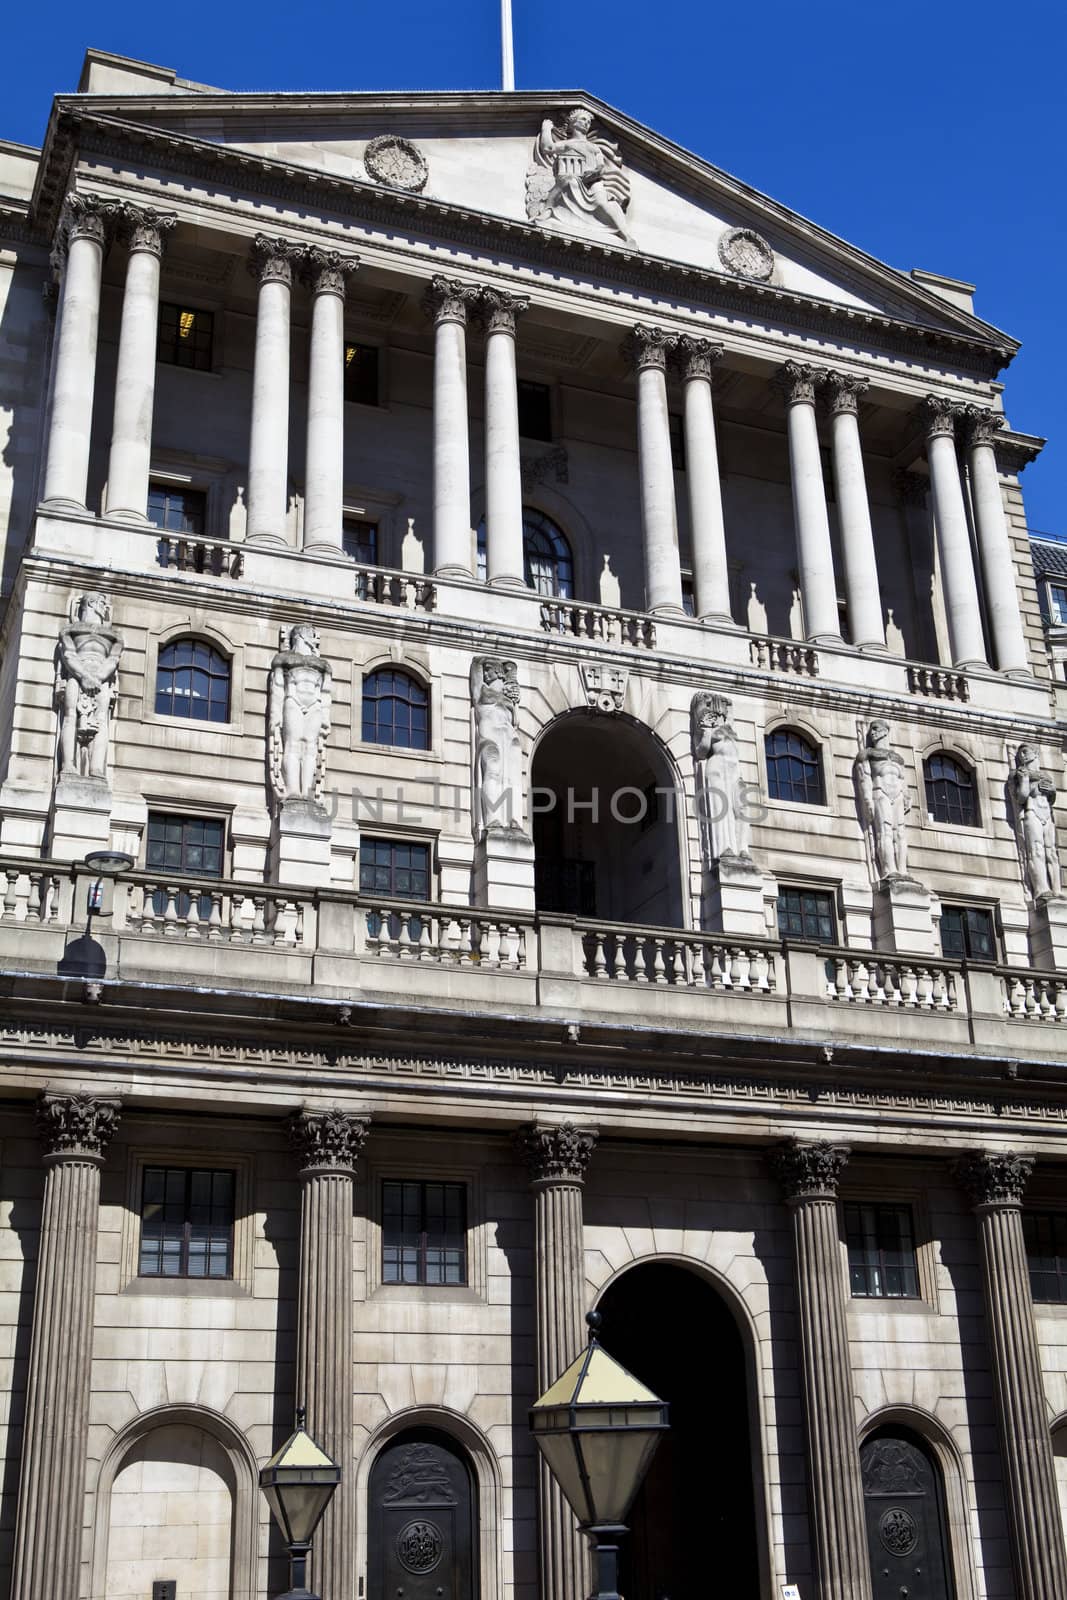 Bank of England in London by chrisdorney